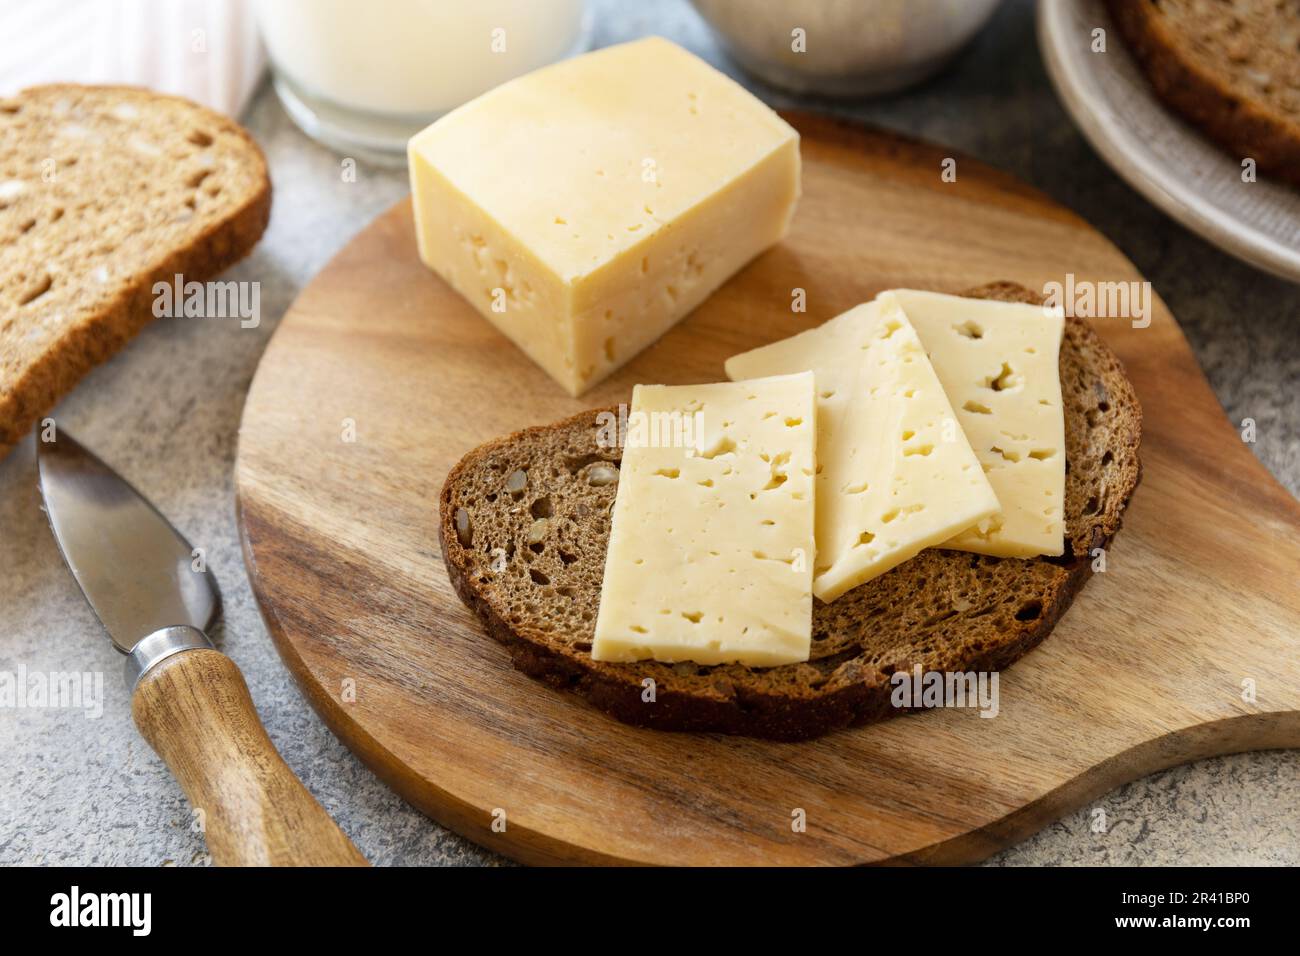 Healthy food concept, breakfast, superfood. Fresh whole grain bread with cheese and a glass of almond milk on stone table. Stock Photo